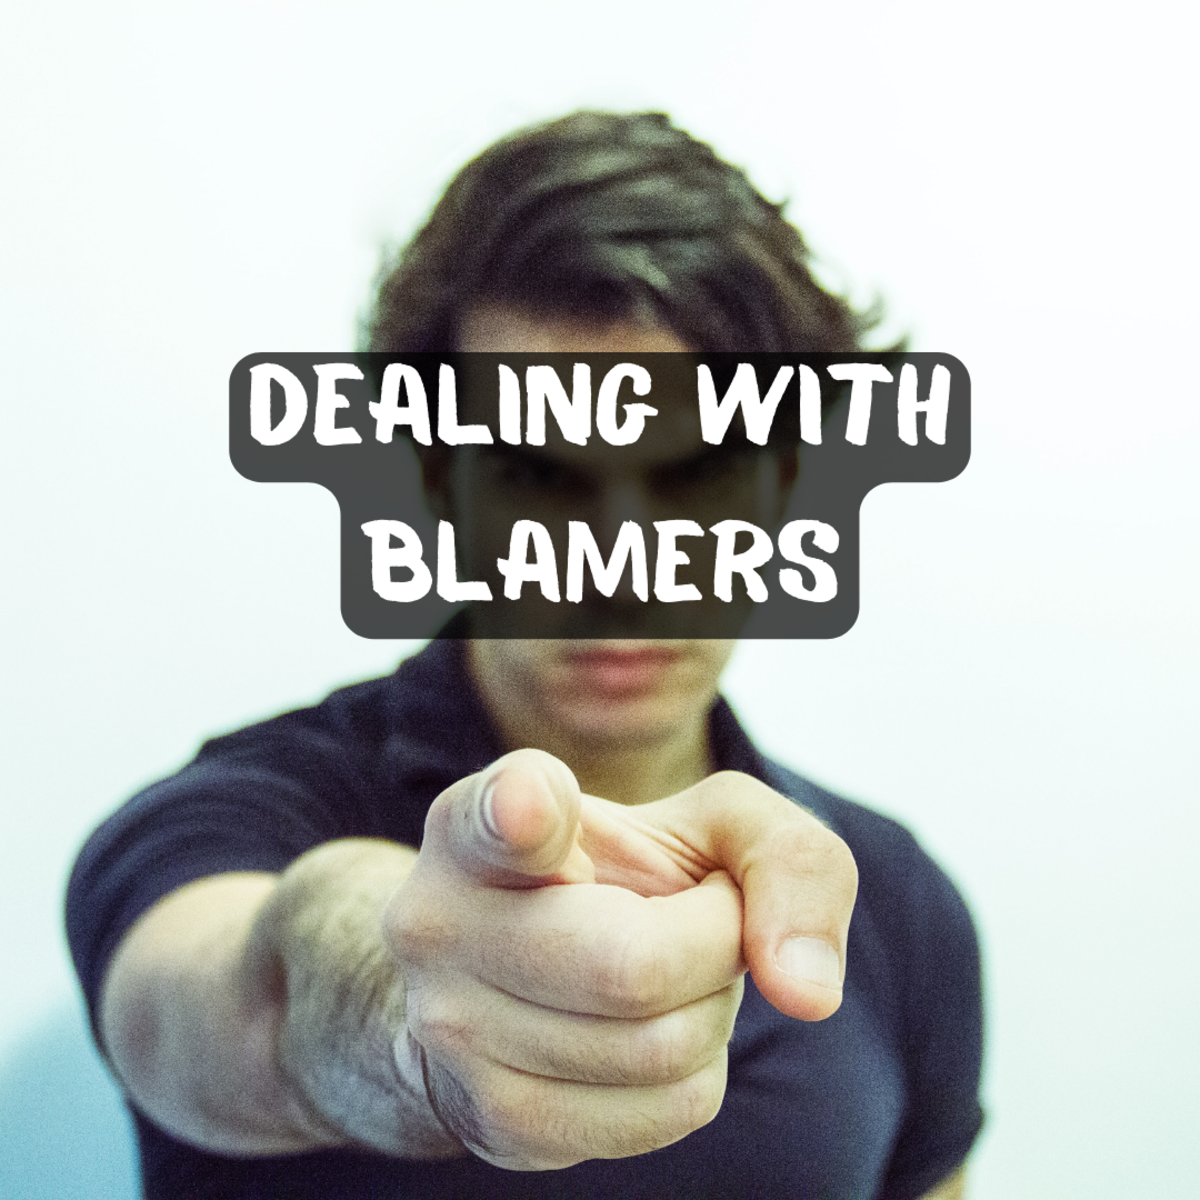 How to Deal With Blamers